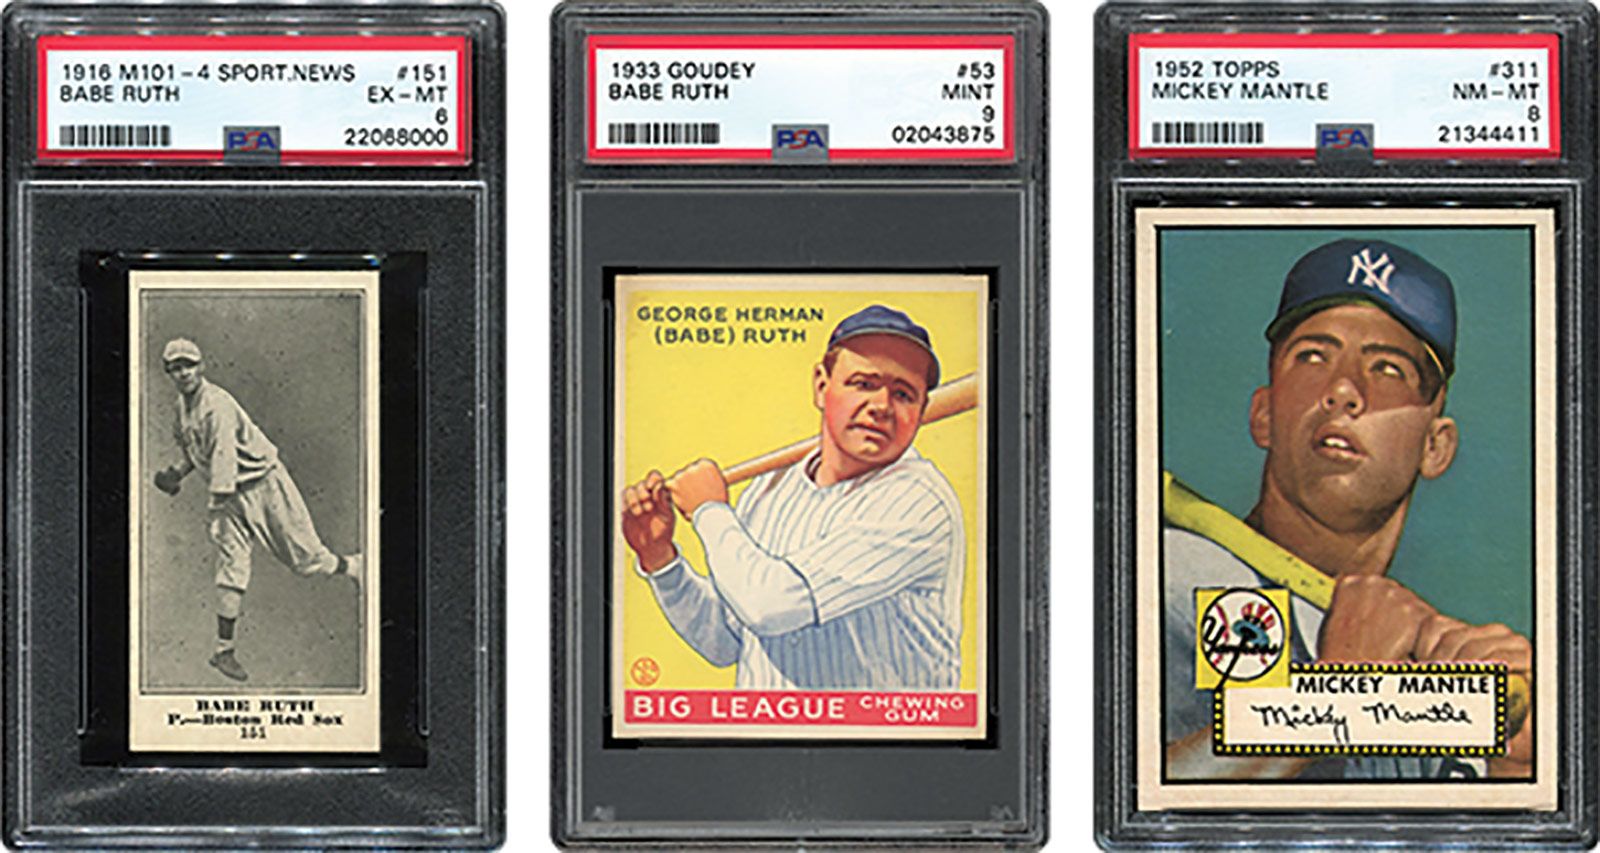 RARE BASEBALL CARDS WORTH MONEY - MOST EXPENSIVE CARDS TO LOOK FOR